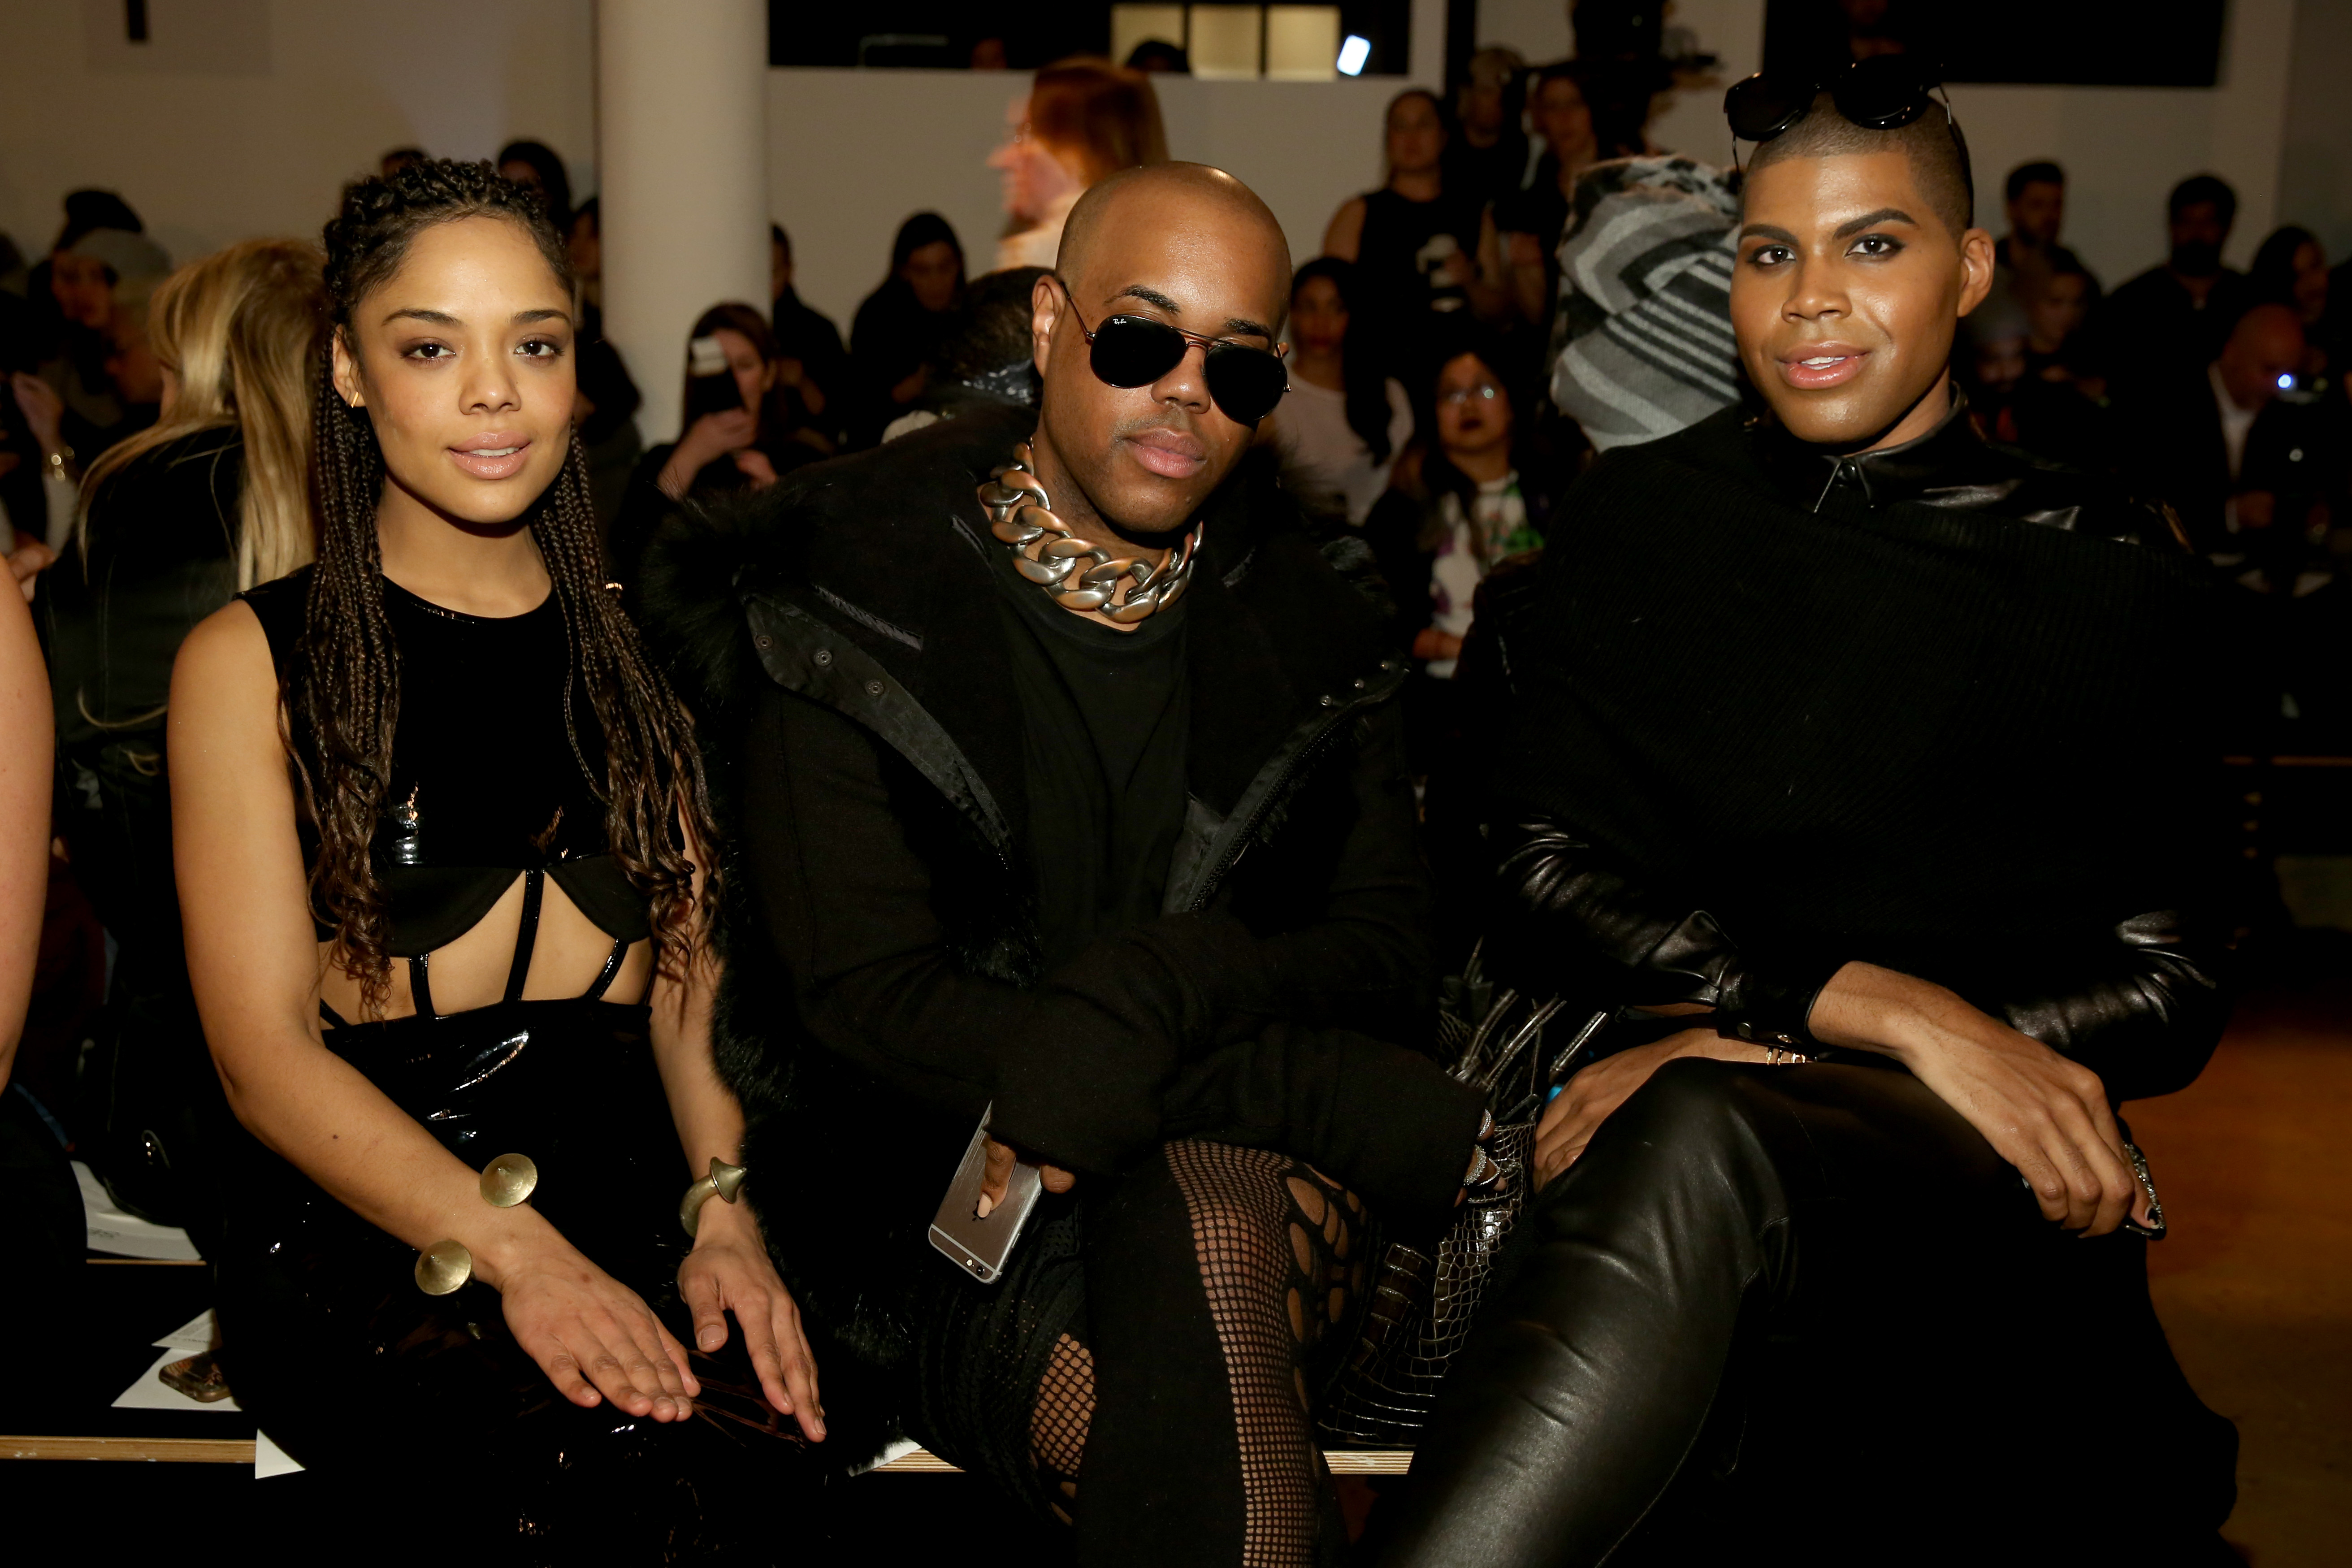 Ej Johnson Fashion Designer - Ej Johnson Is Not Just Some Other Rich Girl T...